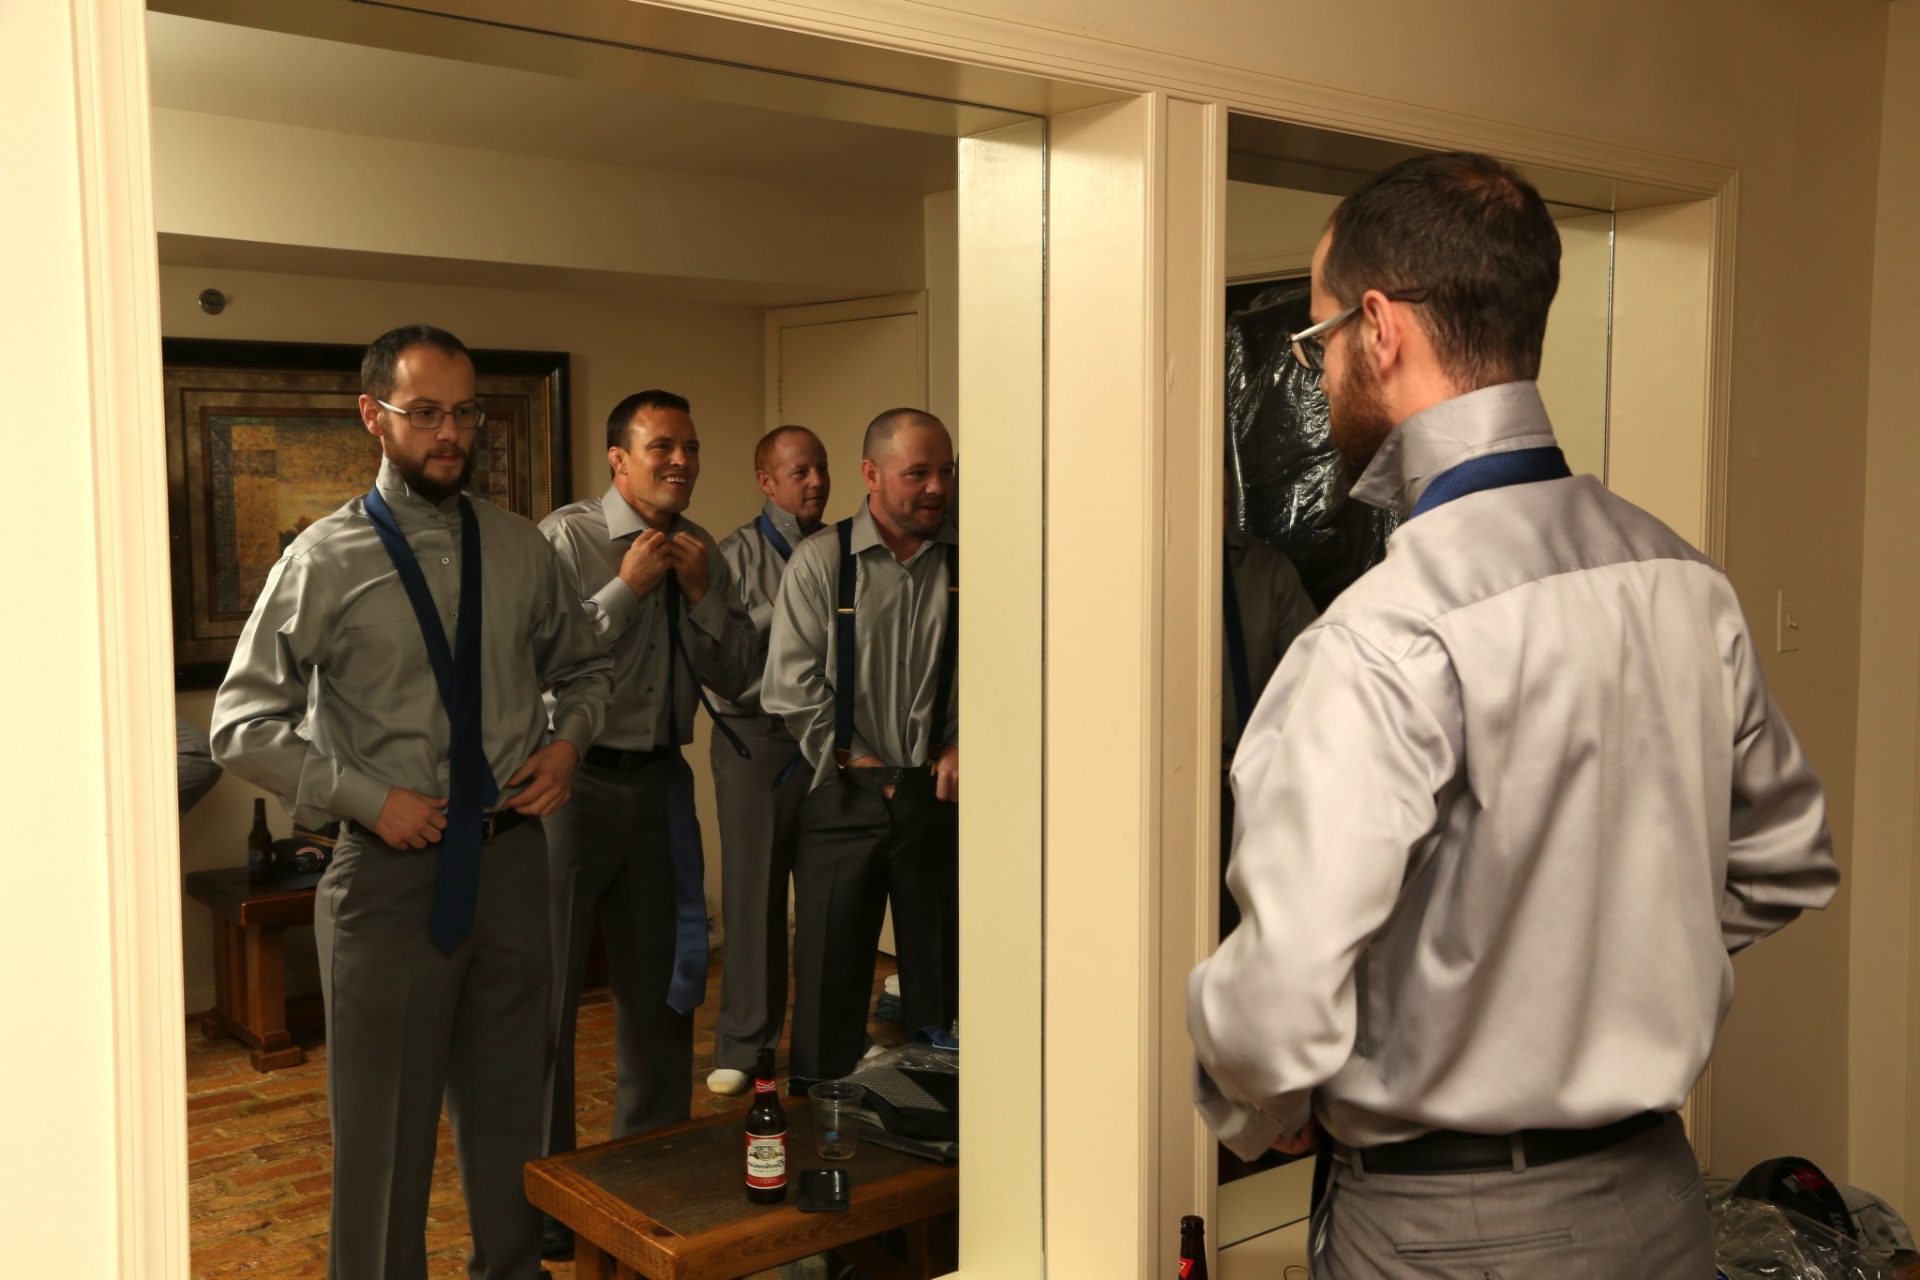 Large mirrors make wedding preparations easy for groom and groom's men